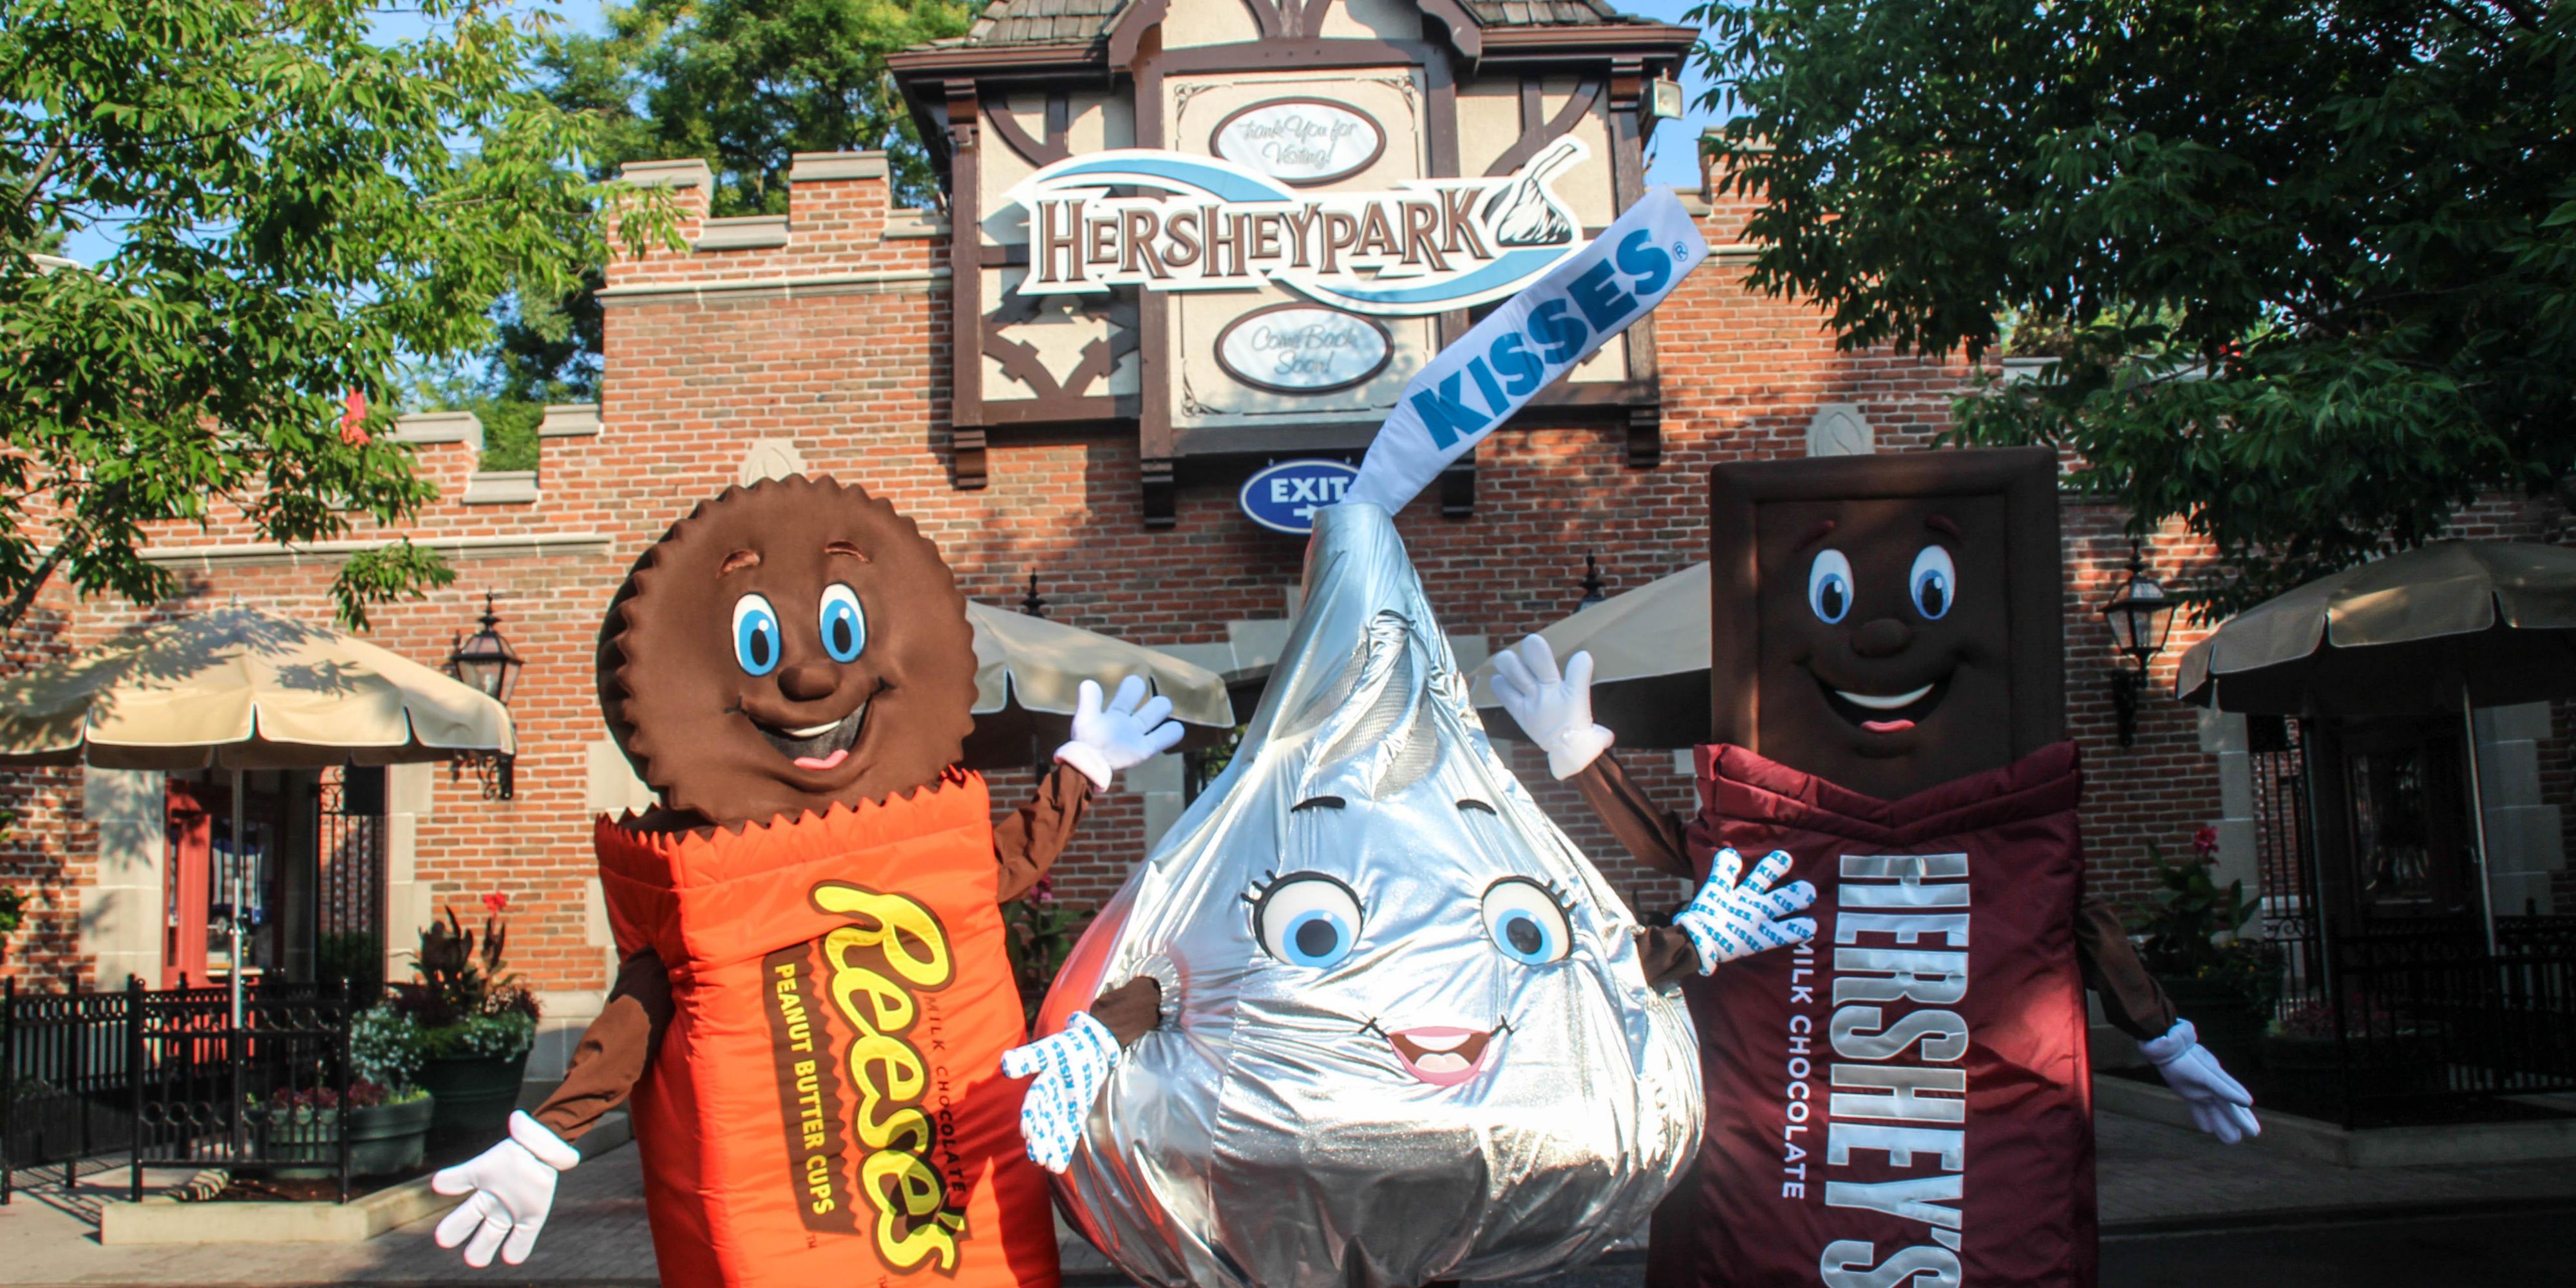 There is so much to see and do in beautiful Hershey, PA.  We are centrally located to places like the Giant Center, Hersheypark, Hershey Chocolate World, Hershey Gardens, & Zoo America.  

After all that adventure try a nice relaxing day at Melt Spa, retail therapy at the Tanger Outlets or dining at THE CHOCOLATIER or MILTON'S ICE CREAM PARLOR.